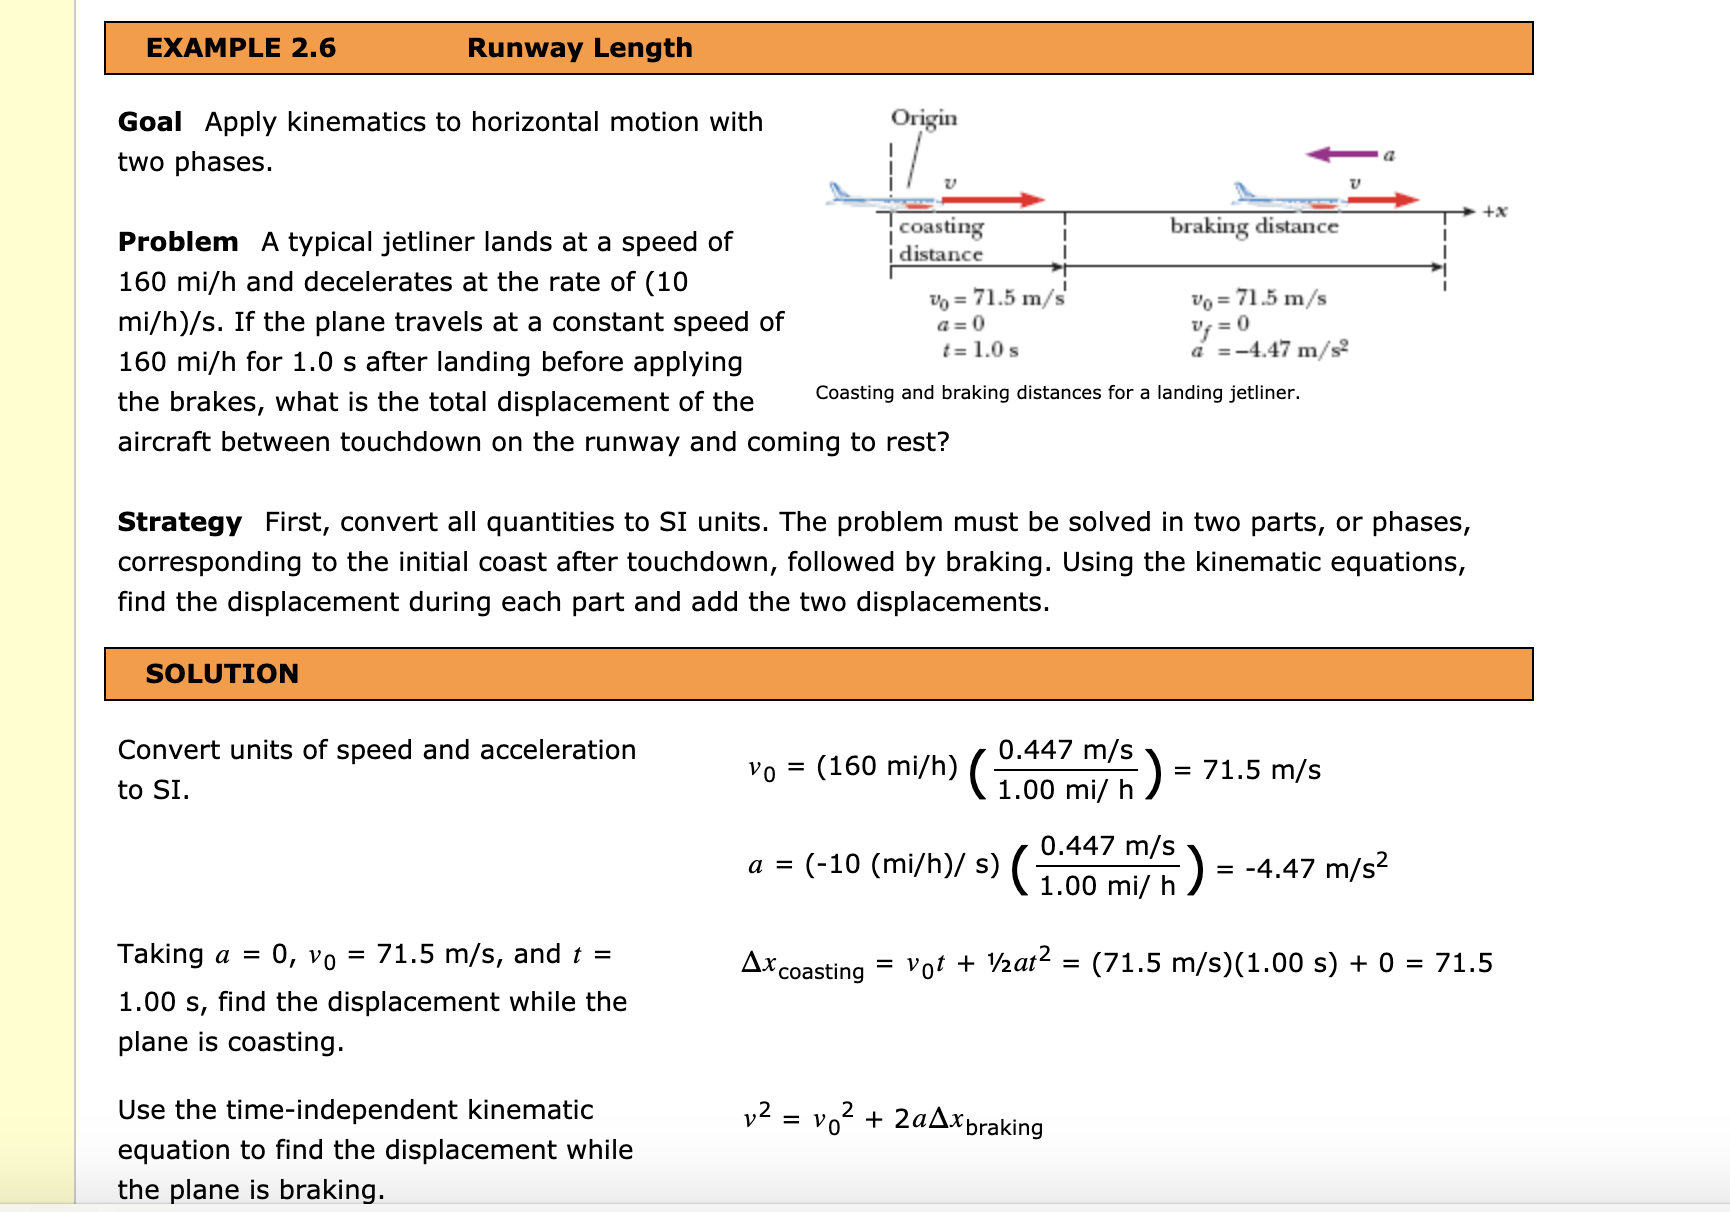 EXAMPLE 2.6
Runway Length
Origin
Goal Apply kinematics to horizontal motion with
two phases.
+x
coasting
i distance
braking distance
Problem A typical jetliner lands at a speed of
160 mi/h and decelerates at the rate of (10
V% = 71.5 m/s
a = 0
t = 1.0 s
vo = 71.5 m/s
mi/h)/s. If the plane travels at a constant speed of
vy = 0
a =-4.47 m/s2
160 mi/h for 1.0 s after landing before applying
Coasting and braking distances for a landing jetliner.
the brakes, what is the total displacement of the
aircraft between touchdown on the runway and coming to rest?
Strategy First, convert all quantities to SI units. The problem must be solved in two parts, or phases,
corresponding to the initial coast after touchdown, followed by braking. Using the kinematic equations,
find the displacement during each part and add the two displacements.
SOLUTION
0.447 m/s
Convert units of speed and acceleration
vo = (160 mi/h)
= 71.5 m/s
1.00 mi/ h )
to SI.
0.447 m/s
(-10 (mi/h)/ s)( 1.00 mi/ h )
= -4.47 m/s2
0, vo
= 71.5 m/s, and t =
Taking a =
vot + V2at? = (71.5 m/s)(1.00 s) + 0 = 71.5
Ax coasting
%3D
1.00 s, find the displacement while the
plane is coasting.
v2 = vo? + 2aAxbraking
Use the time-independent kinematic
%3D
equation to find the displacement while
the plane is braking.
